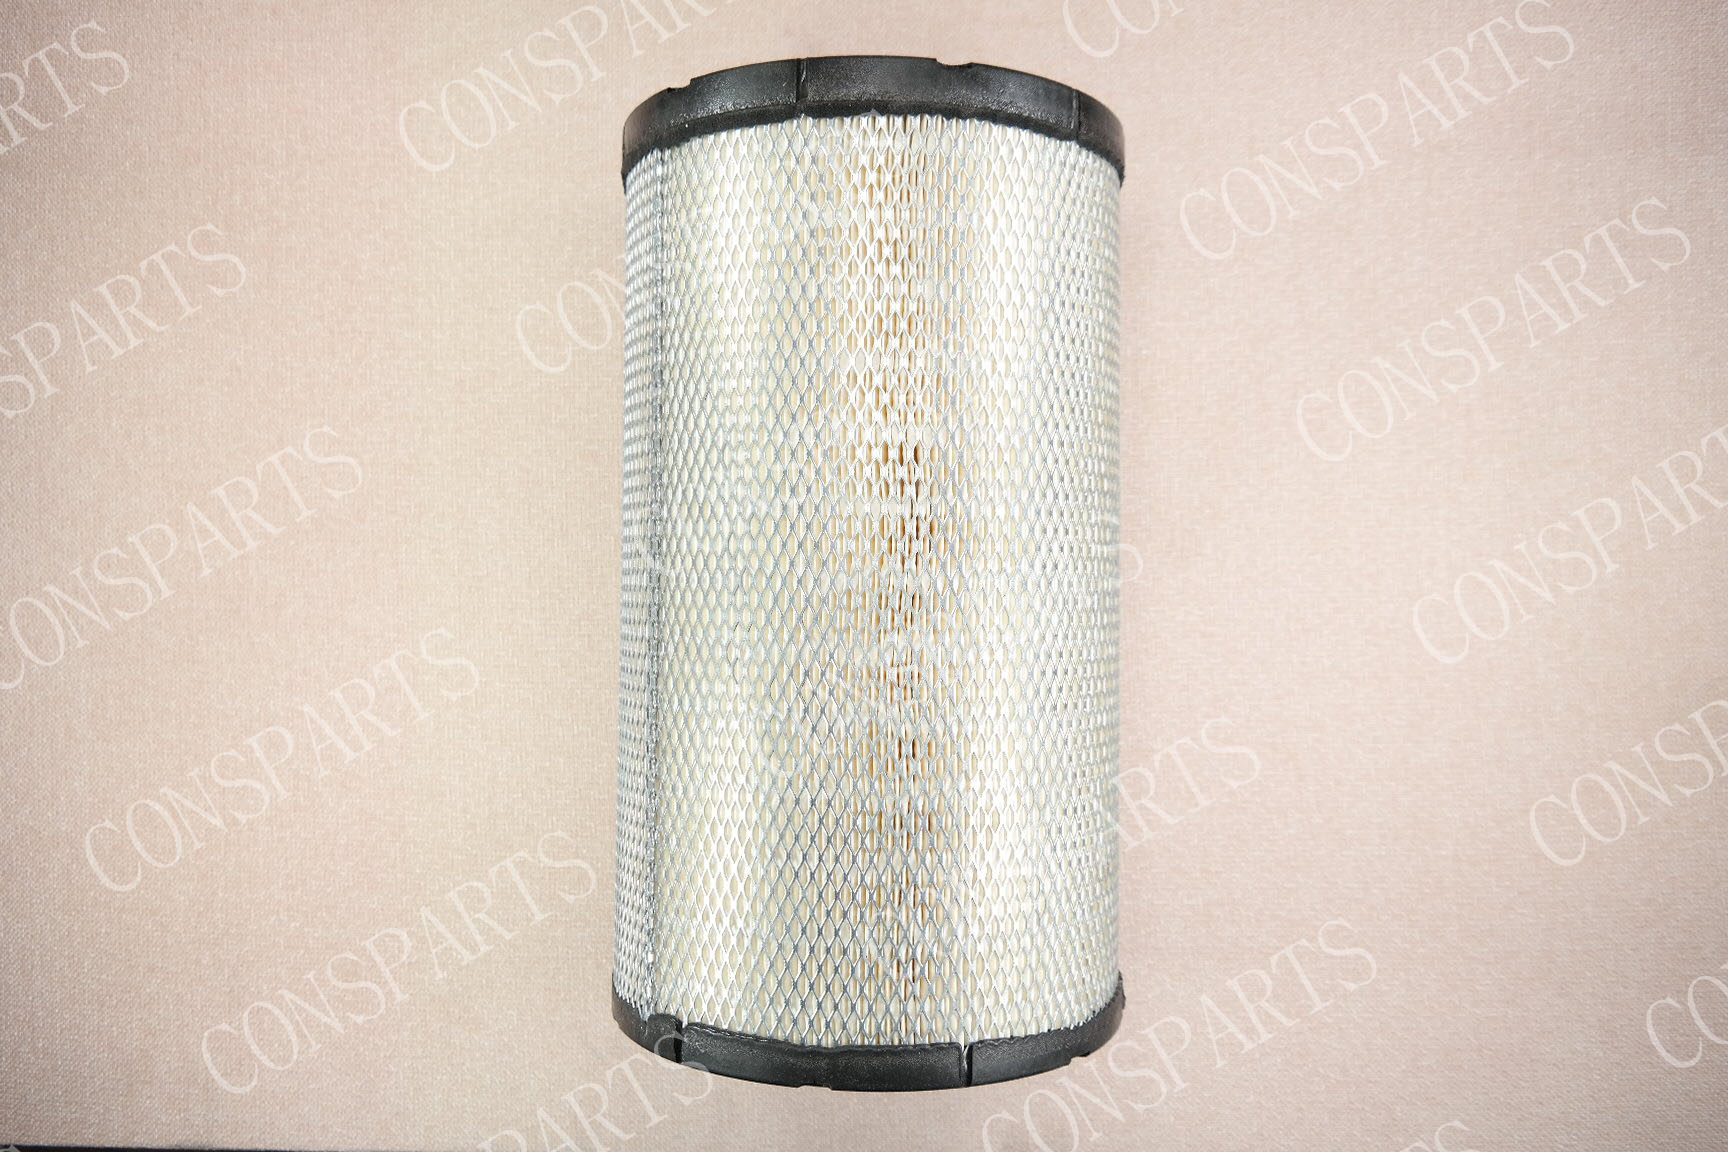 CONSPARTS 에어휠타(AIR FILTER)/FA-1023/PDS175,PDS175S,TD23 외 다수/PDS175S - 1차